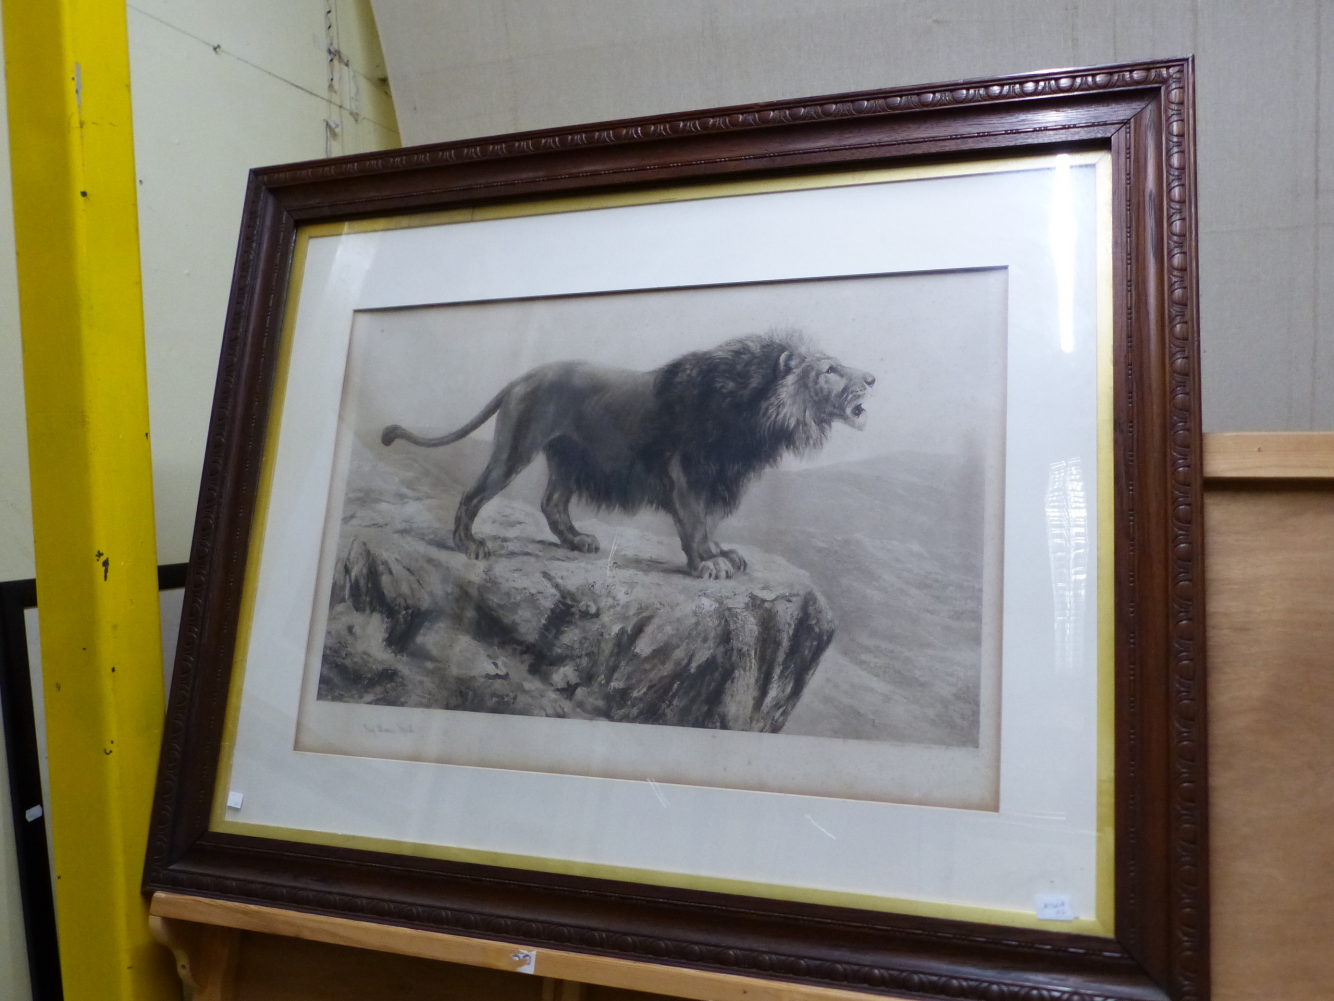 FRED THOMAS SMITH (19th/20th C. ENGLISH SCHOOL) PAIR OF VINTAGE PRINTS OF LIONS, PENCIL SIGNED. 55 x - Image 2 of 4